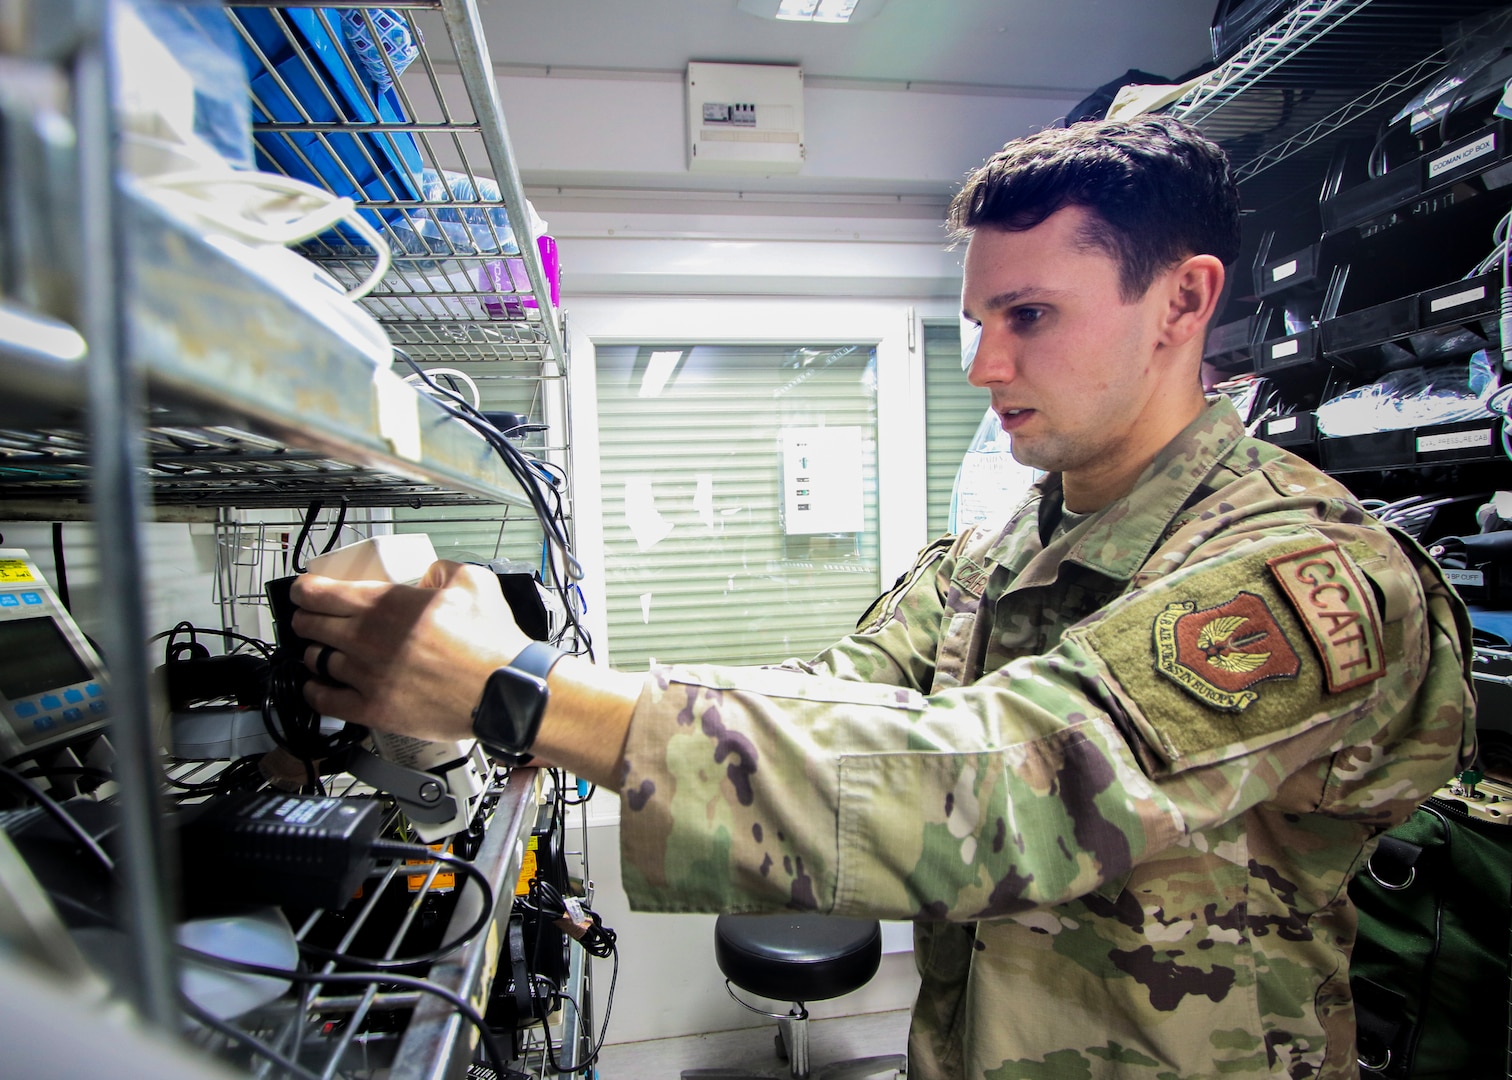 U.S. Air Force Tech Sgt. Adam Cardoza, Noncommissioned Officer in charge, Pulmonary Clinic, Landstuhl Regional Medical Center, performs a preflight inspection on equipment as part of the 86th Medical Squadron’s Critical Care Air Transport Team operations, March 23. Cardoza, a native of Dana Point, California, was recognized as the Air Force’s top Cardiopulmonary Laboratory Noncommissioned Officer of the Year of 2020.